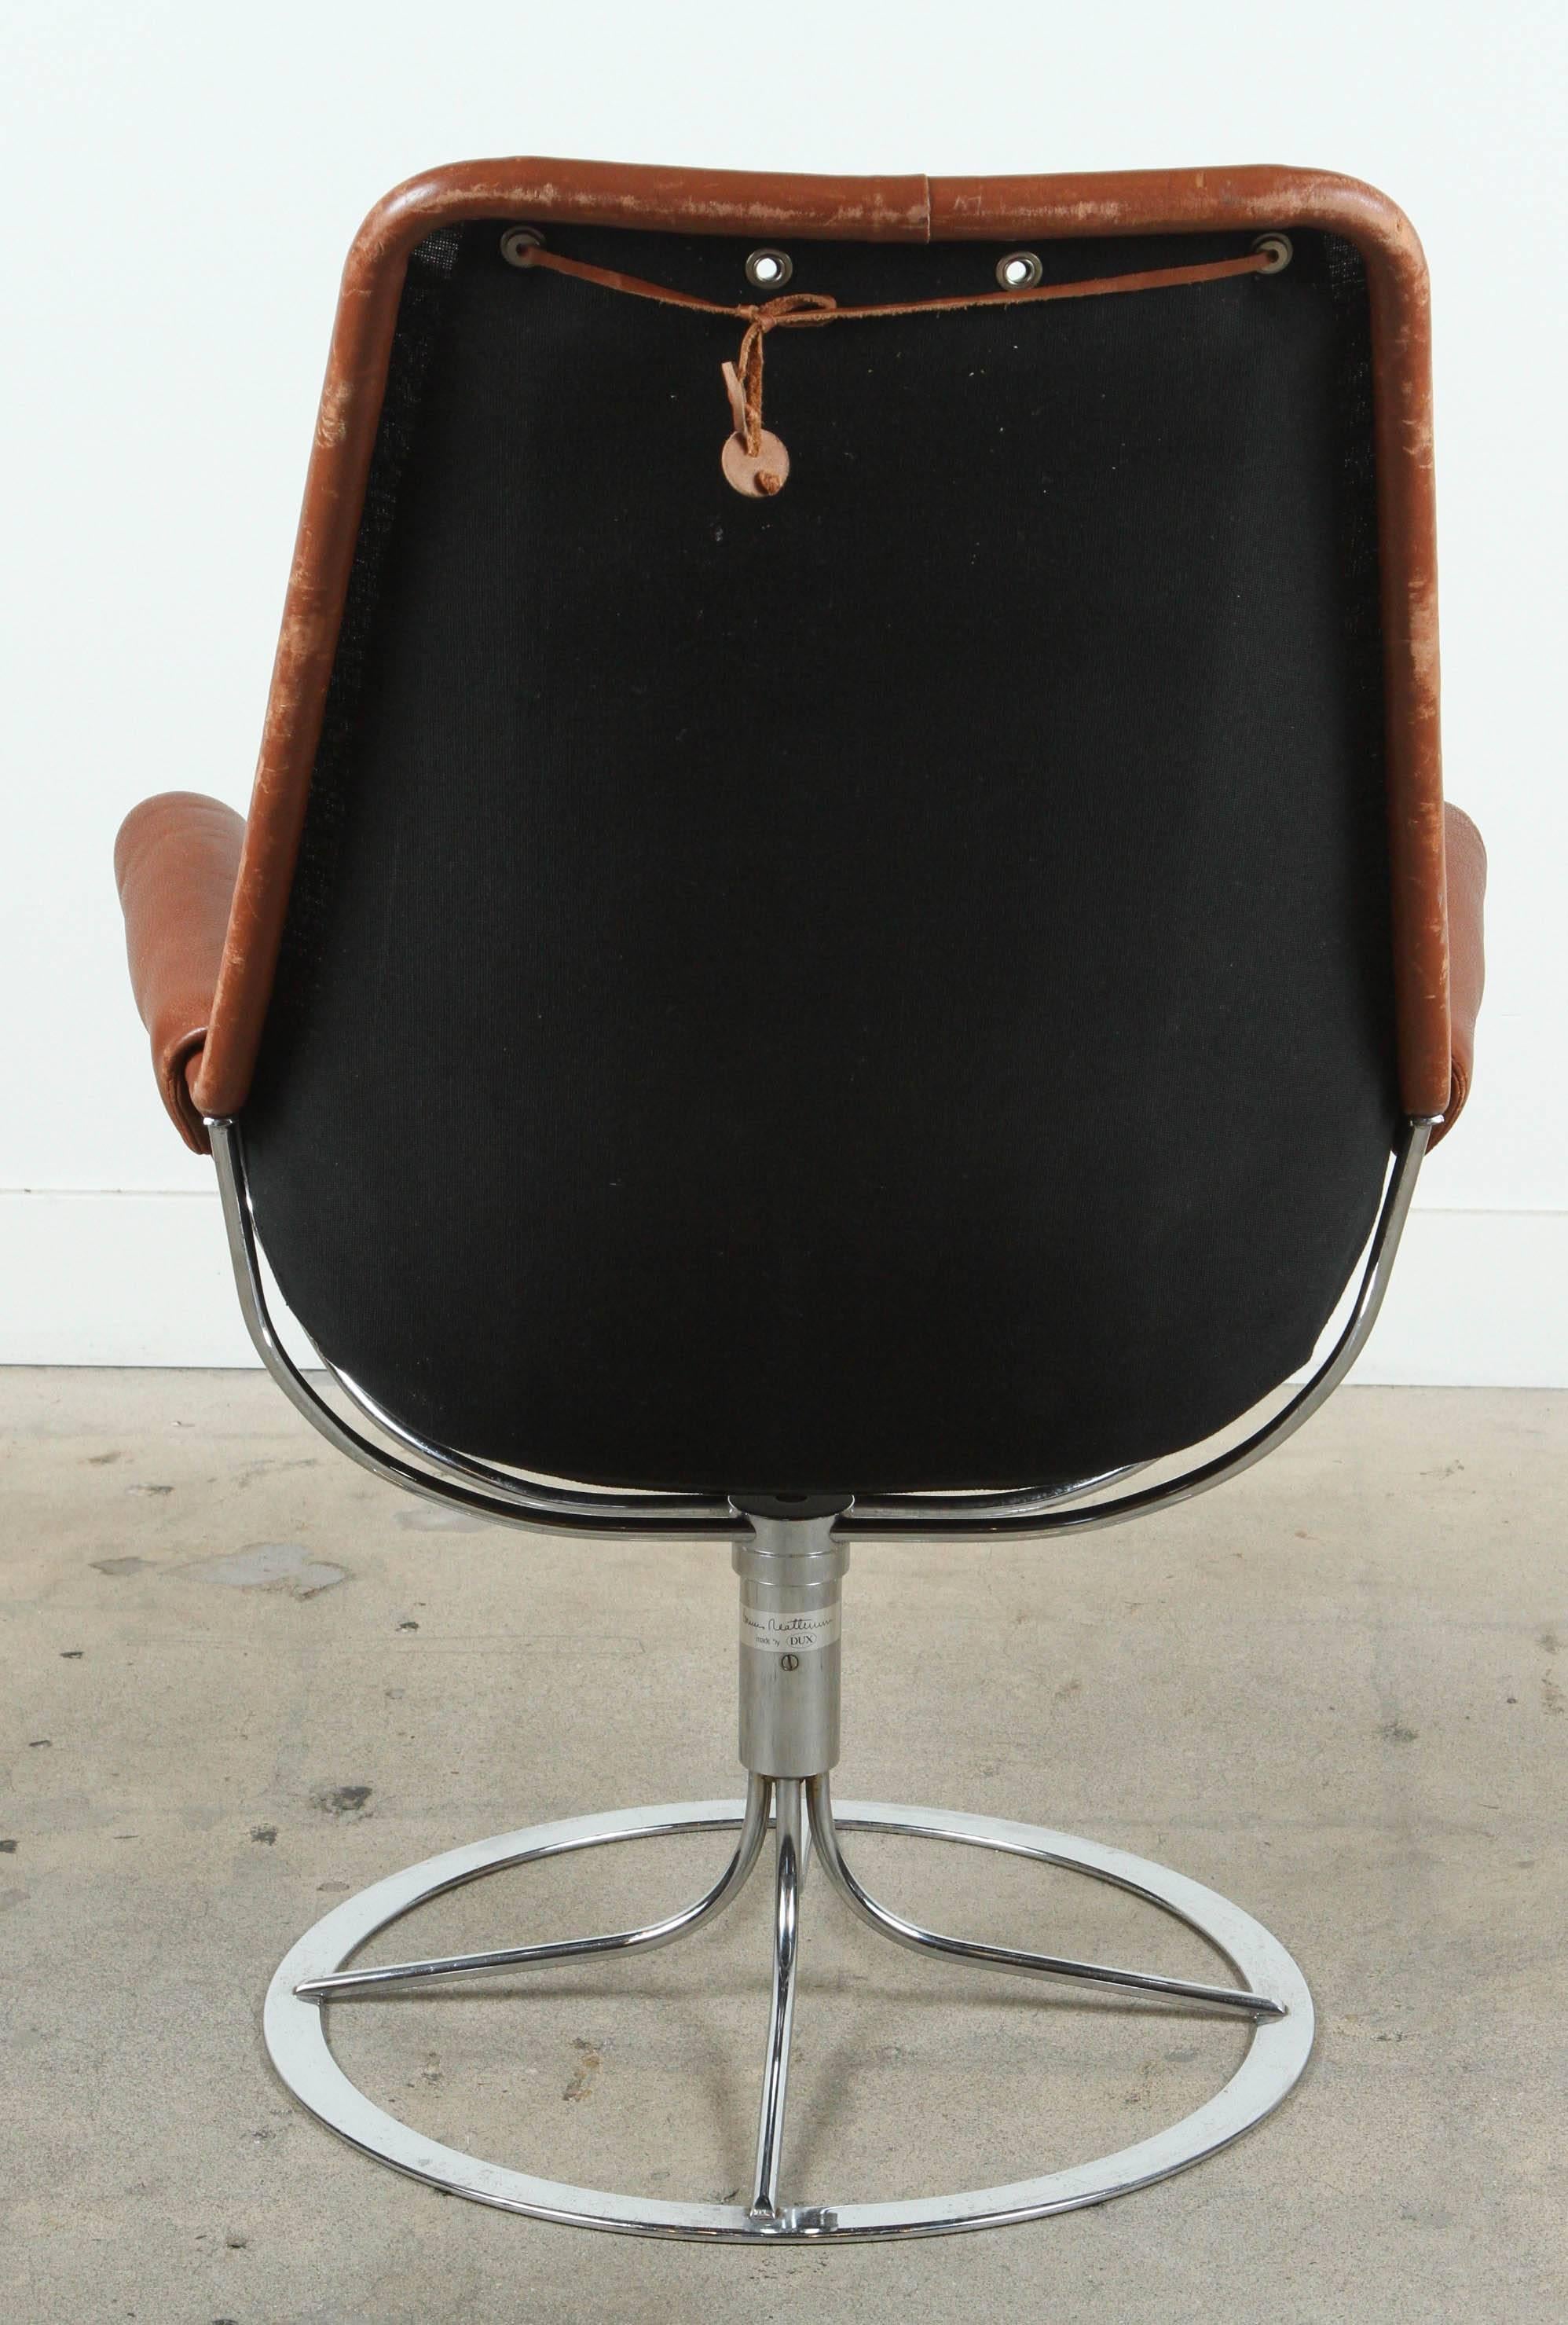 Swedish Leather Jetson Chair by Bruno Mathsson for DUX